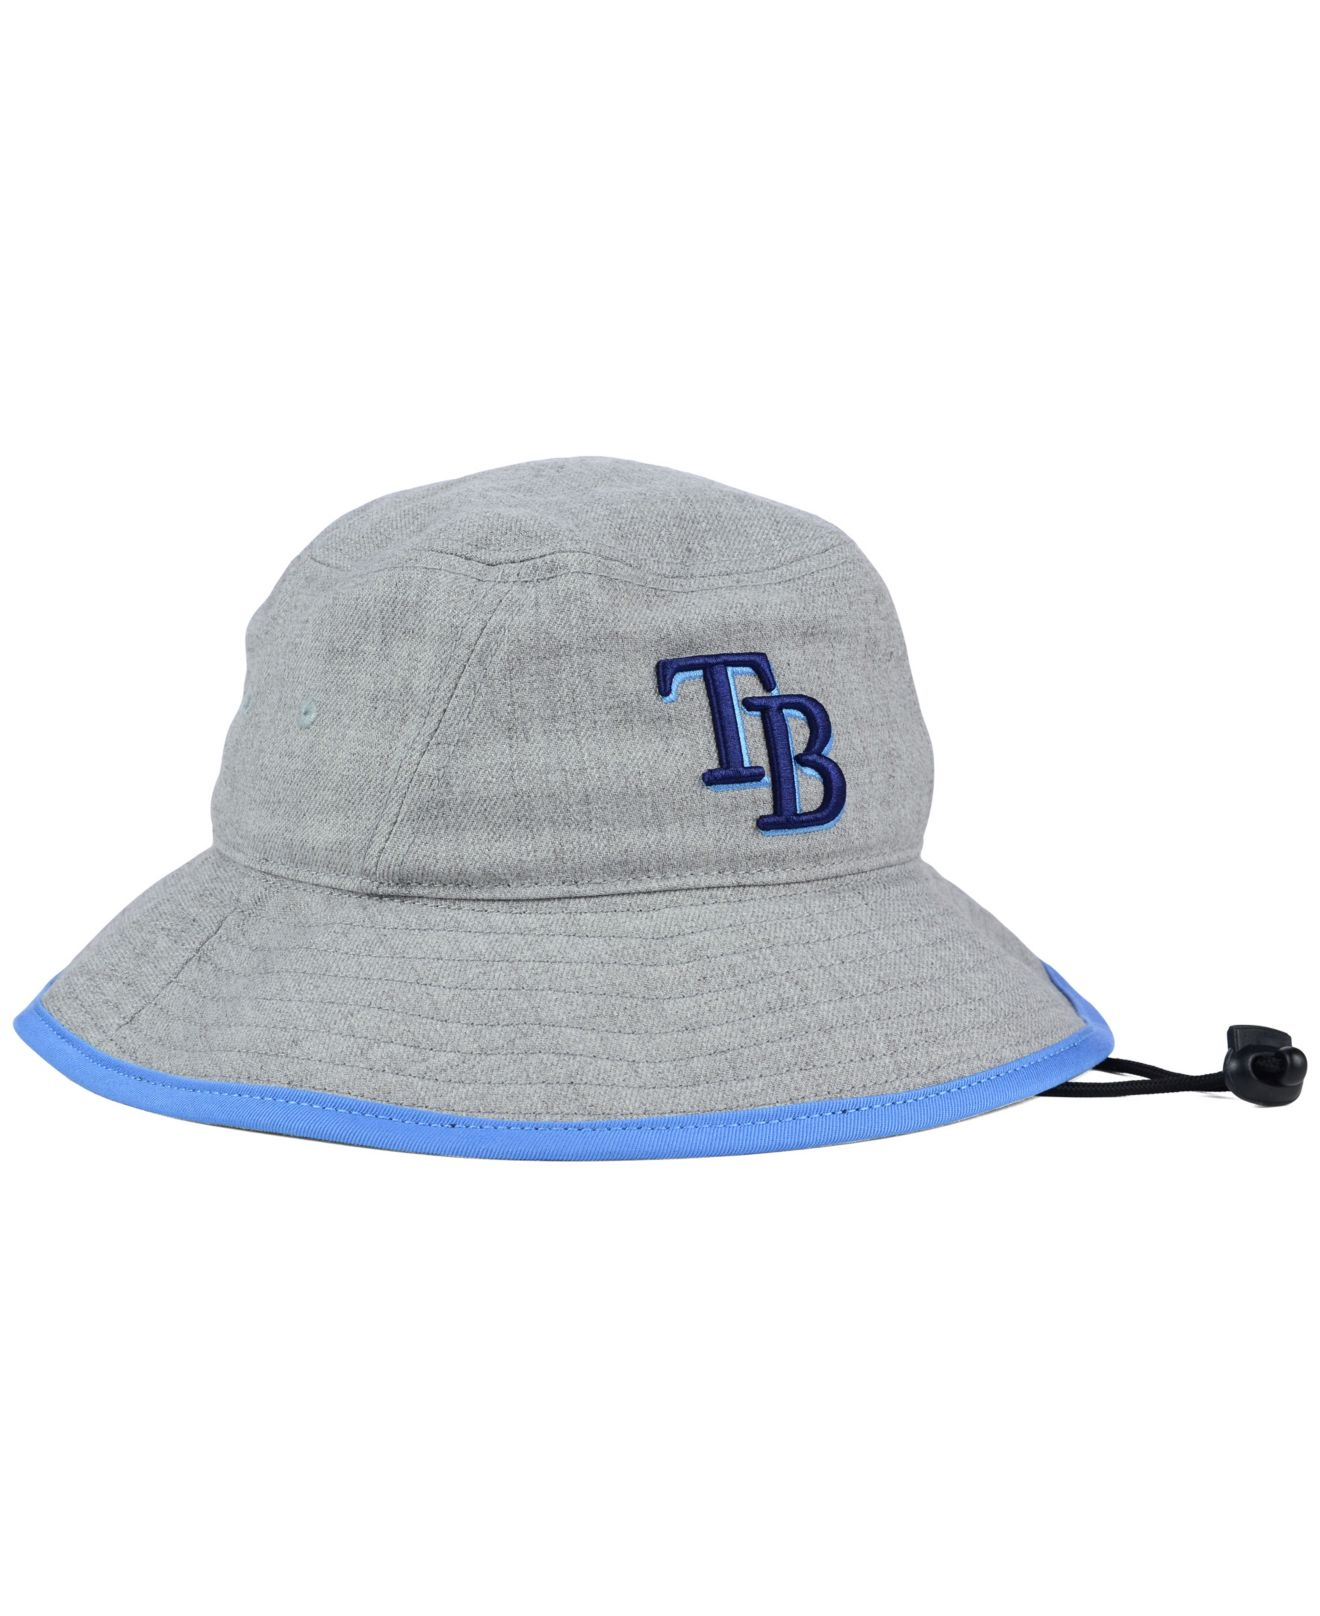 Lyst - KTZ Tampa Bay Rays Heather Tipped Bucket Hat in Gray